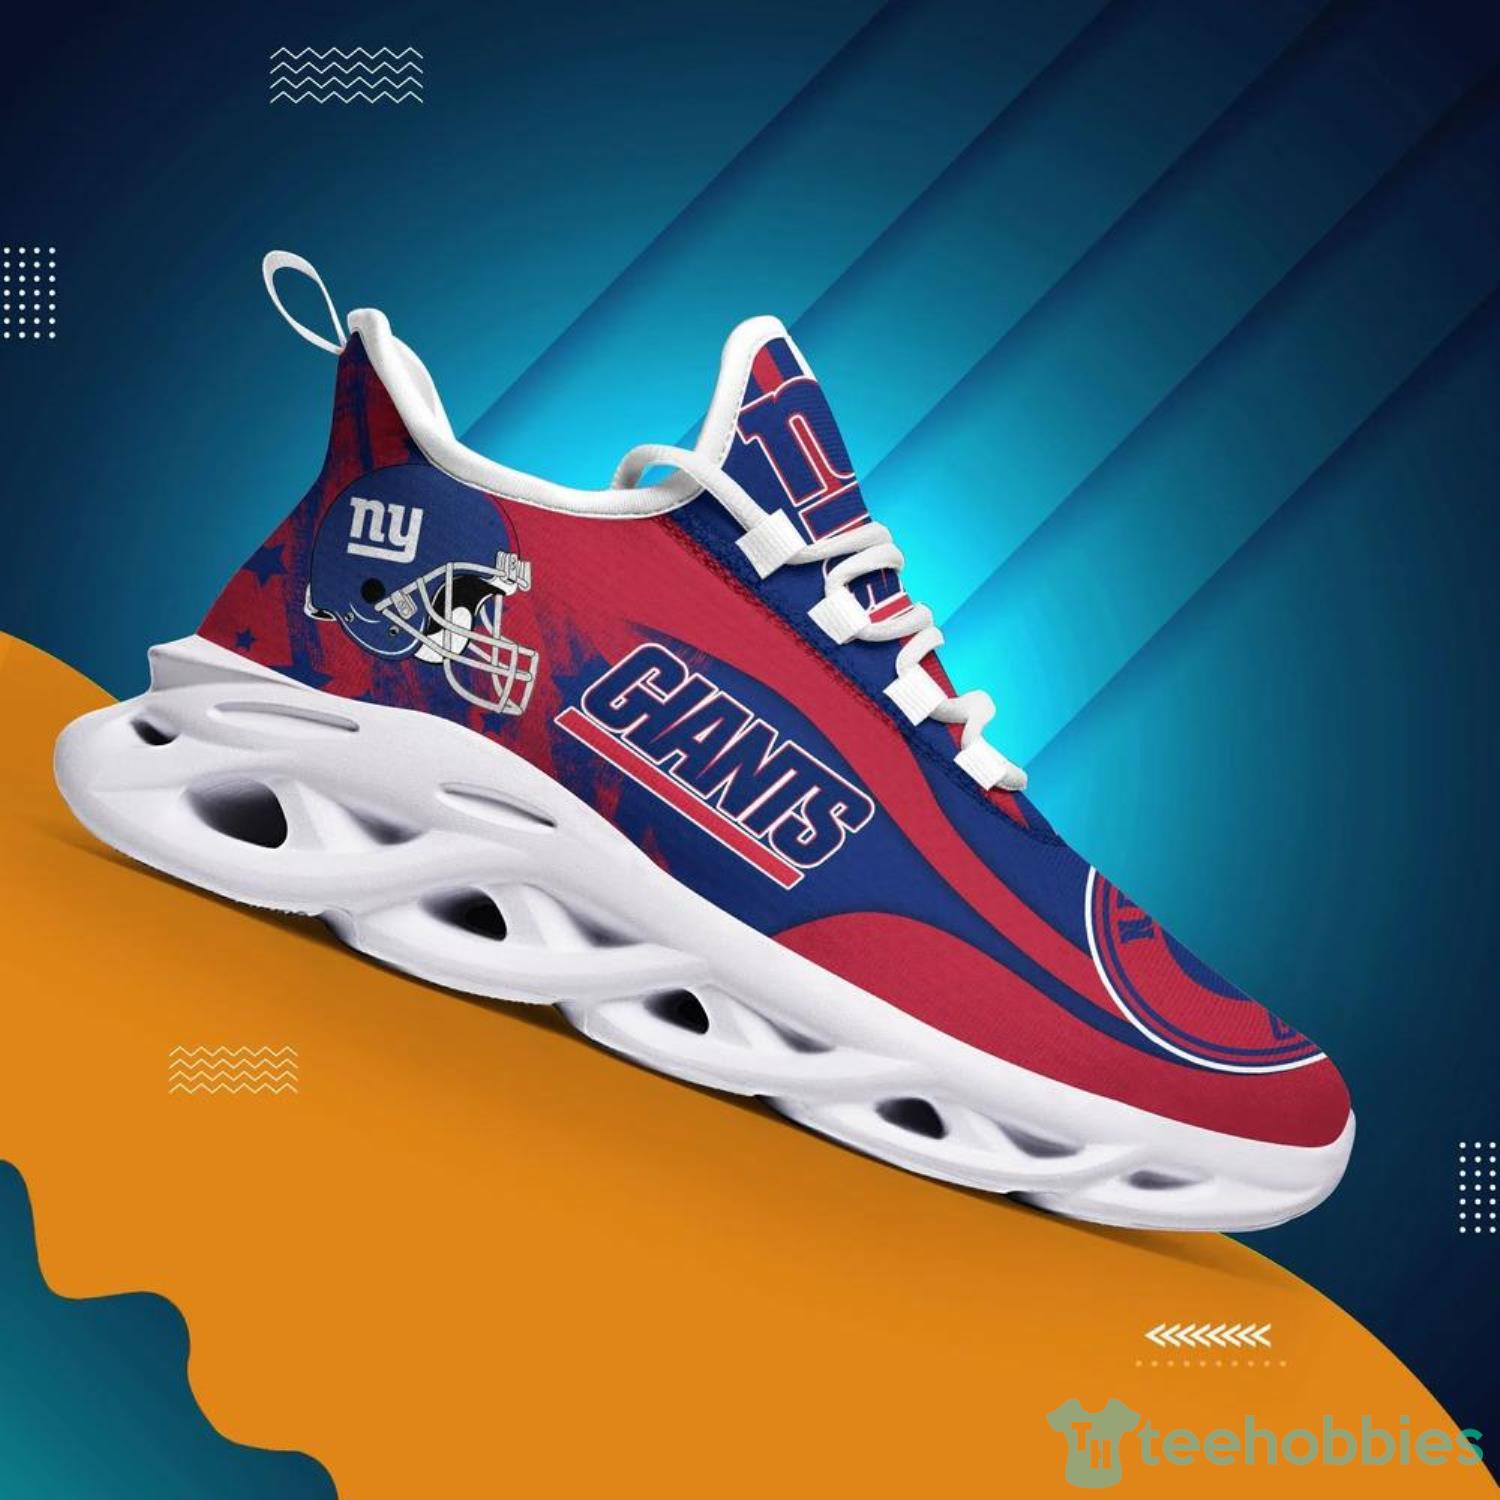 New York Giants NFL Max Soul Shoes Custom Name Sneakers - New York Giants NFL Max Soul Shoes Custom Name, Sneakers Hot Trending Personalized Gifts For NFL Fans_1